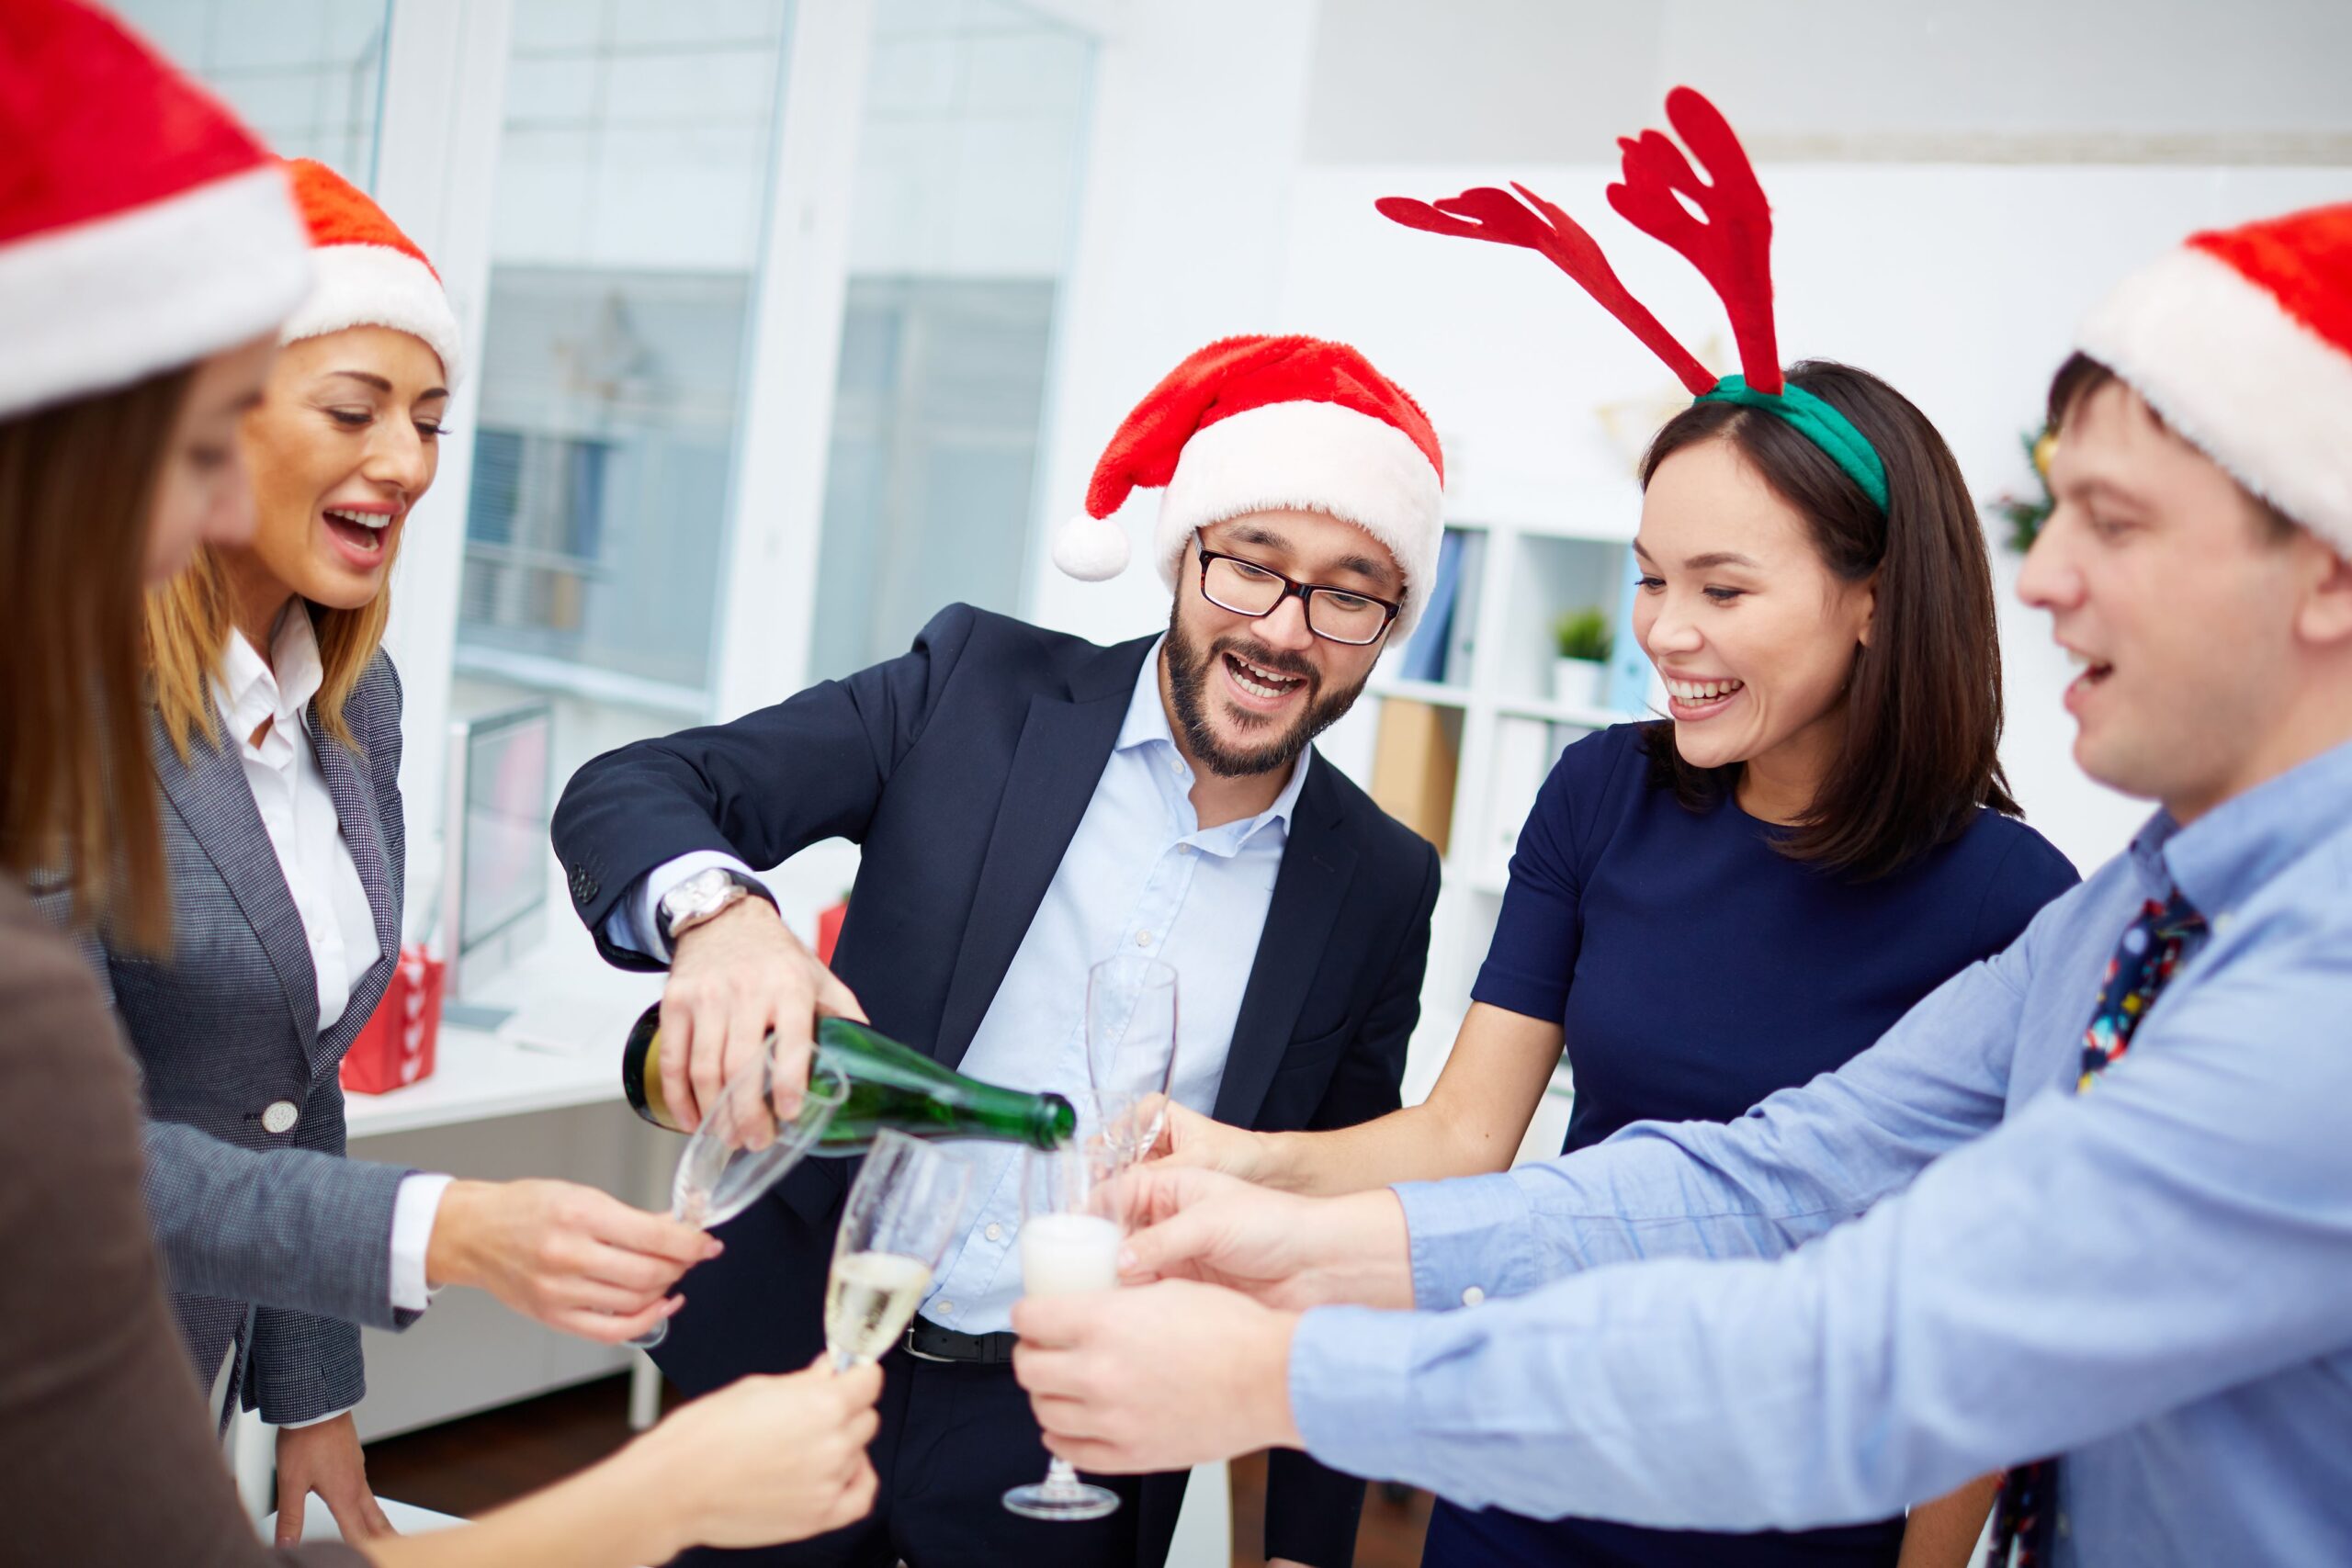 B2B column: Christmas parties and tax law